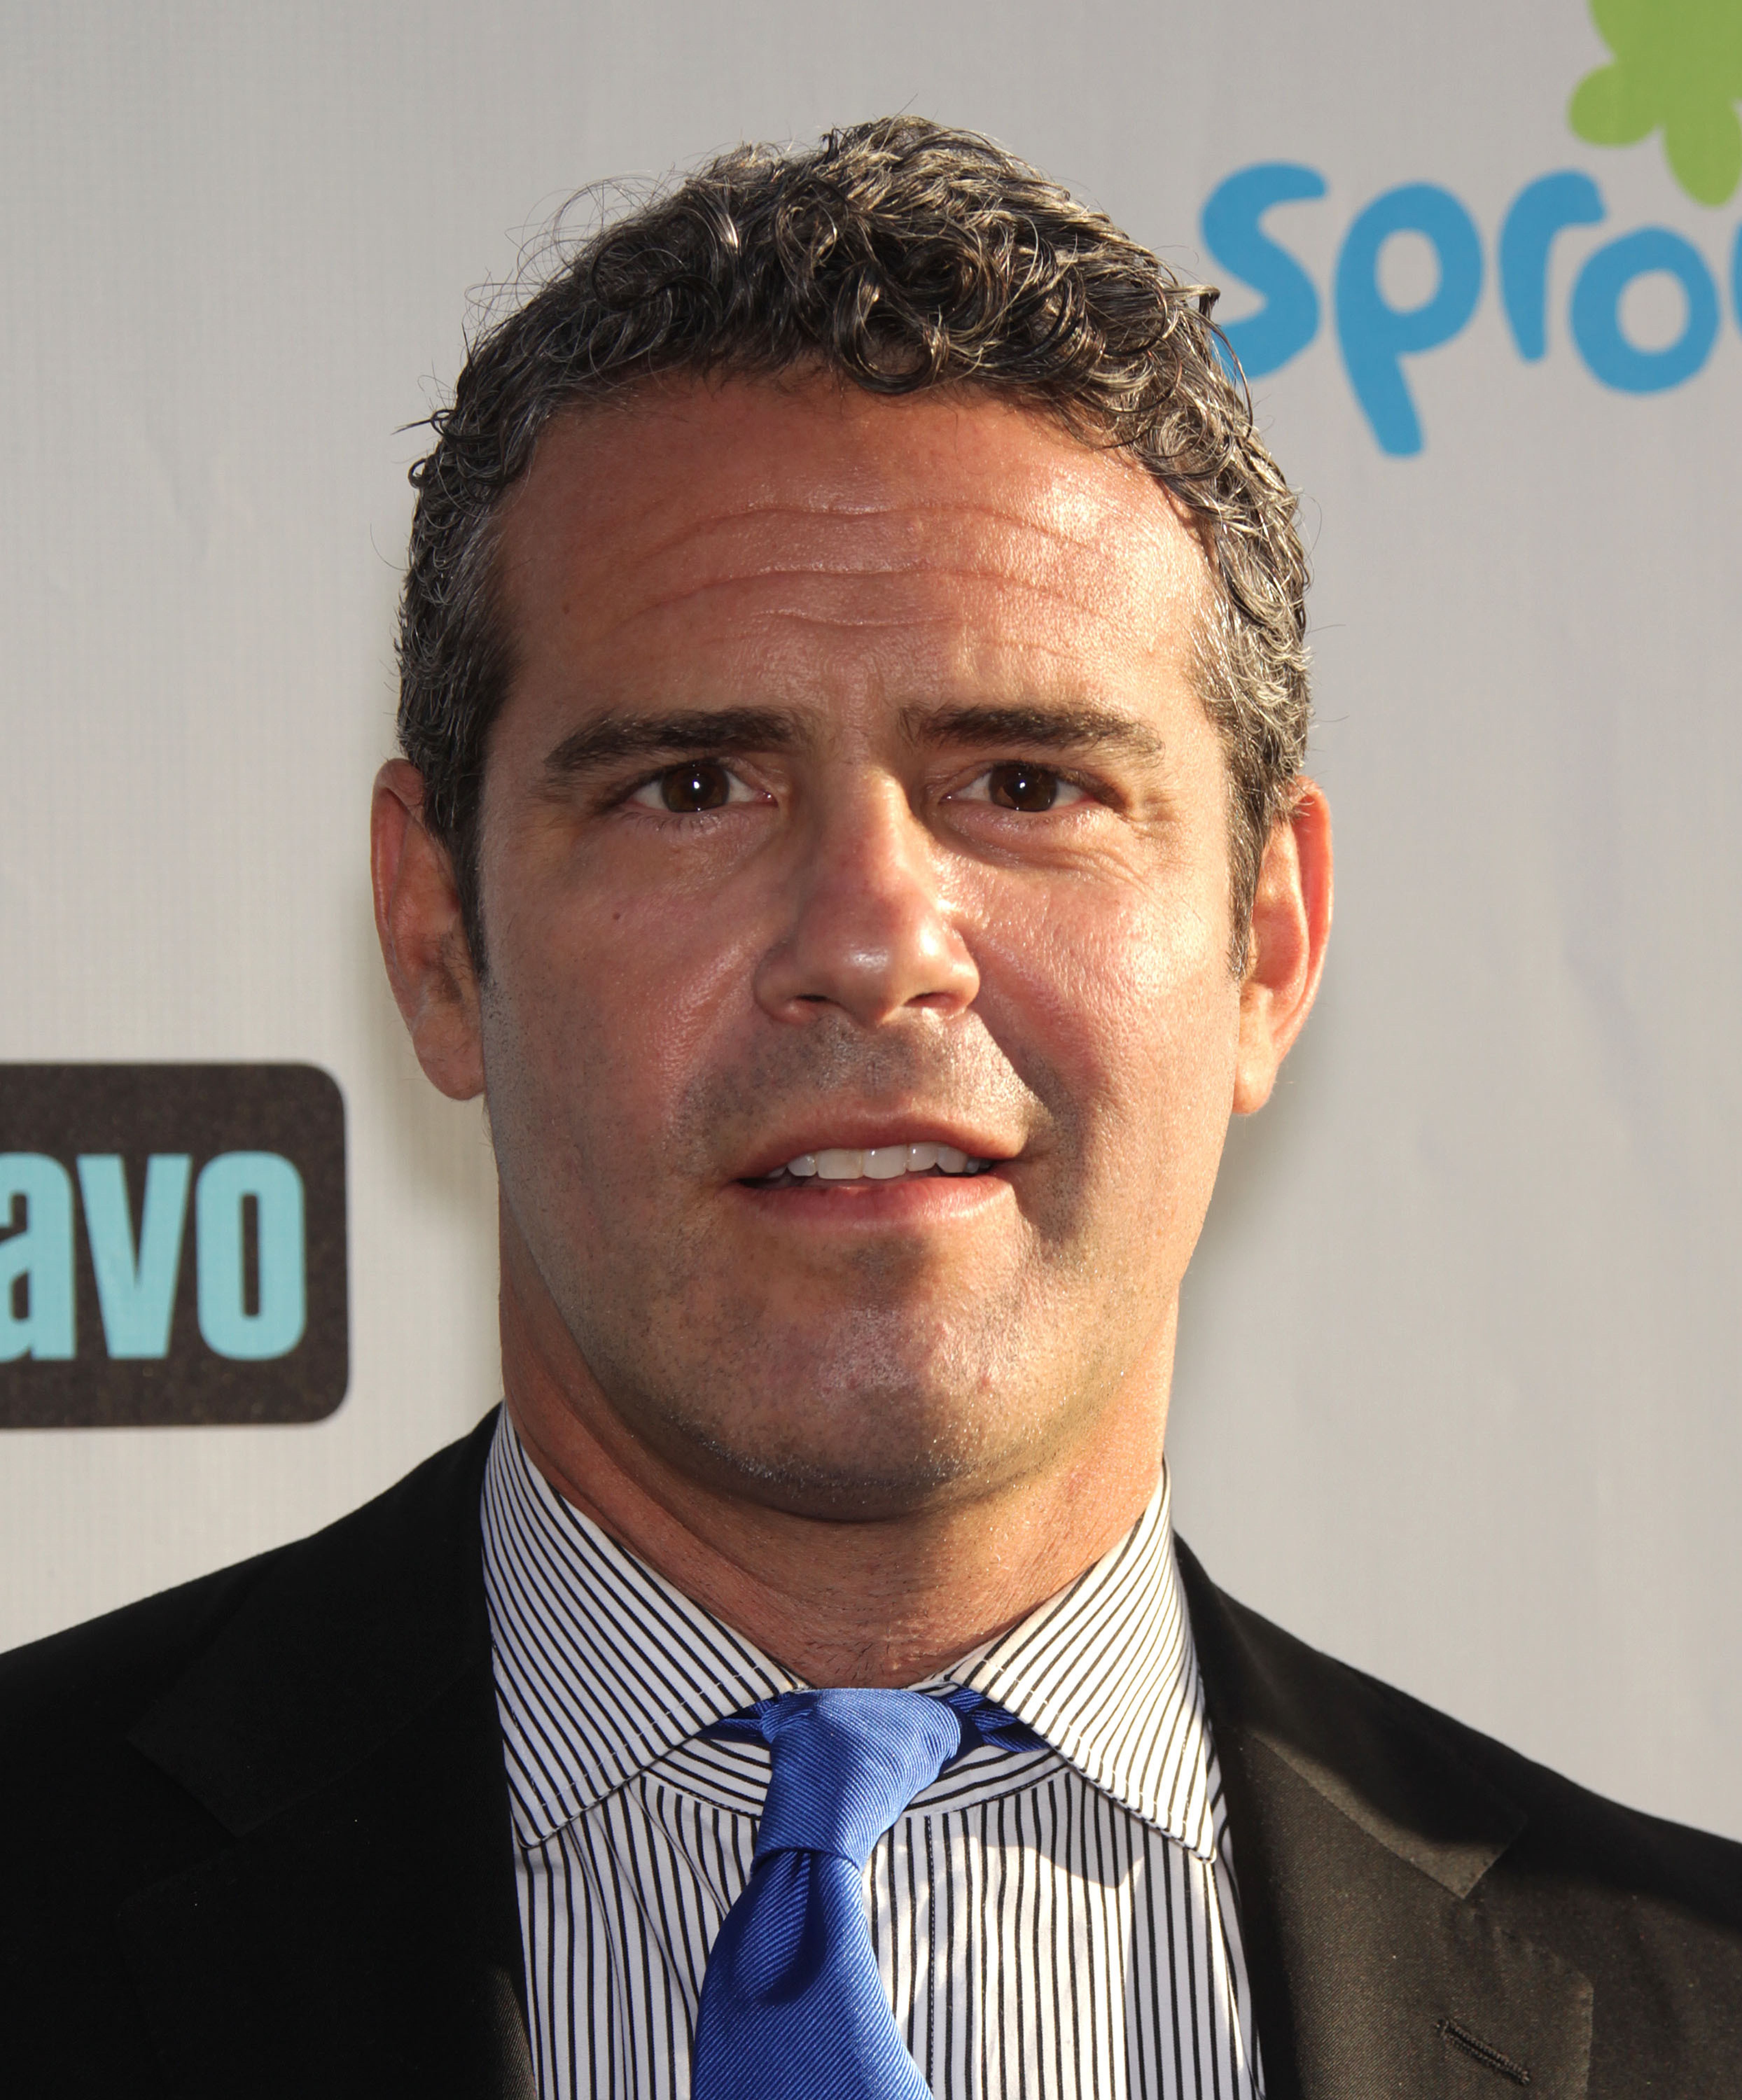 ANDY COHEN arriving to Summer 2011 TCA Party | Shutterstock